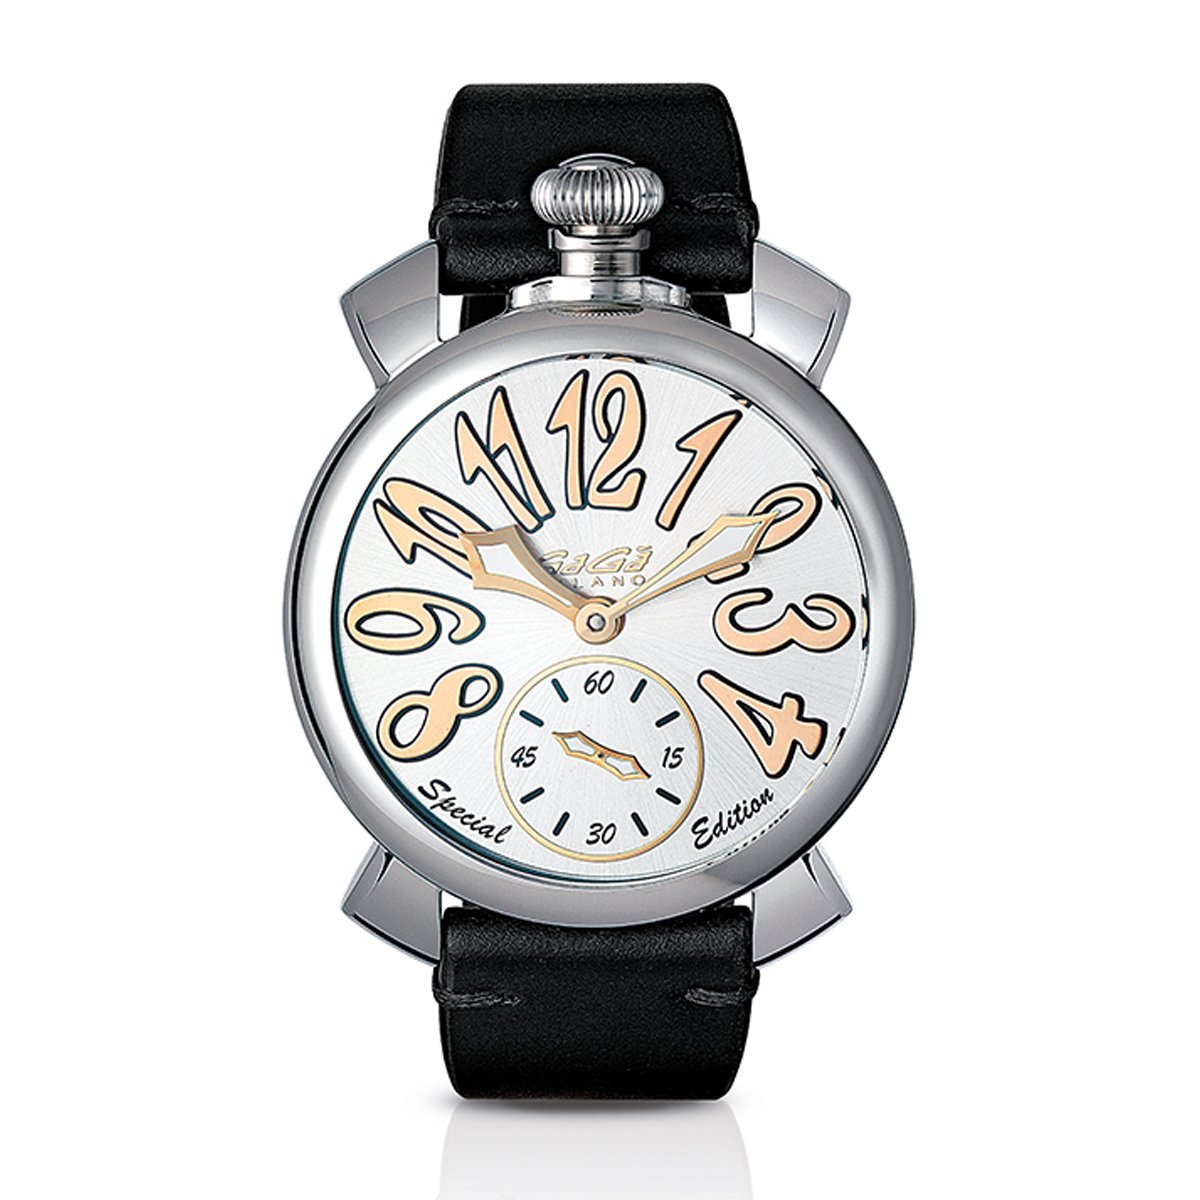 GaGà Milano Manuale 48MM Steel Special Edition - Watches & Crystals